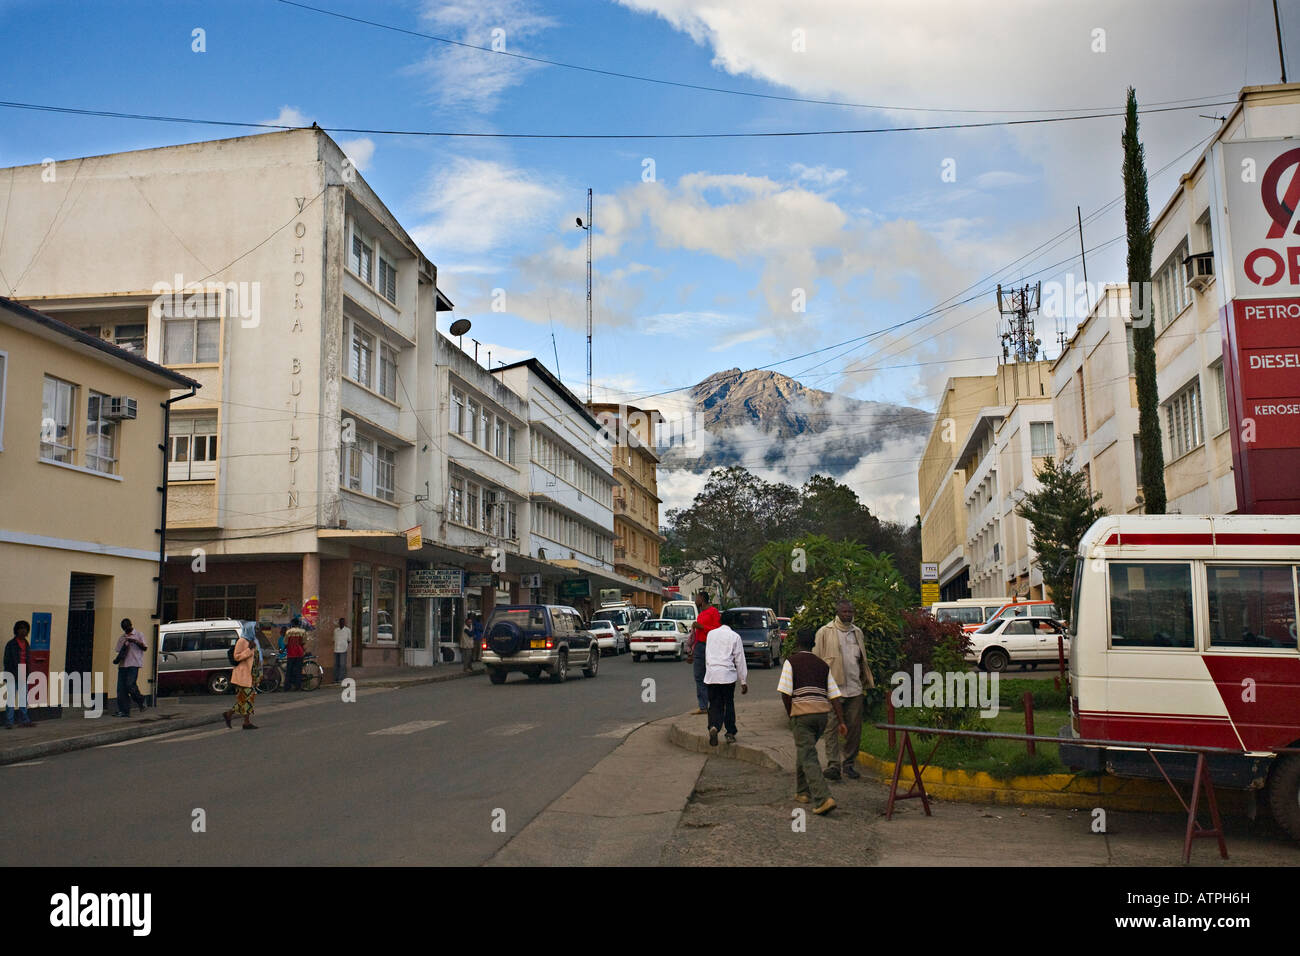 One of the streets of Arusha with Mt. Meru in the background, Tanzania, Africa Stock Photo